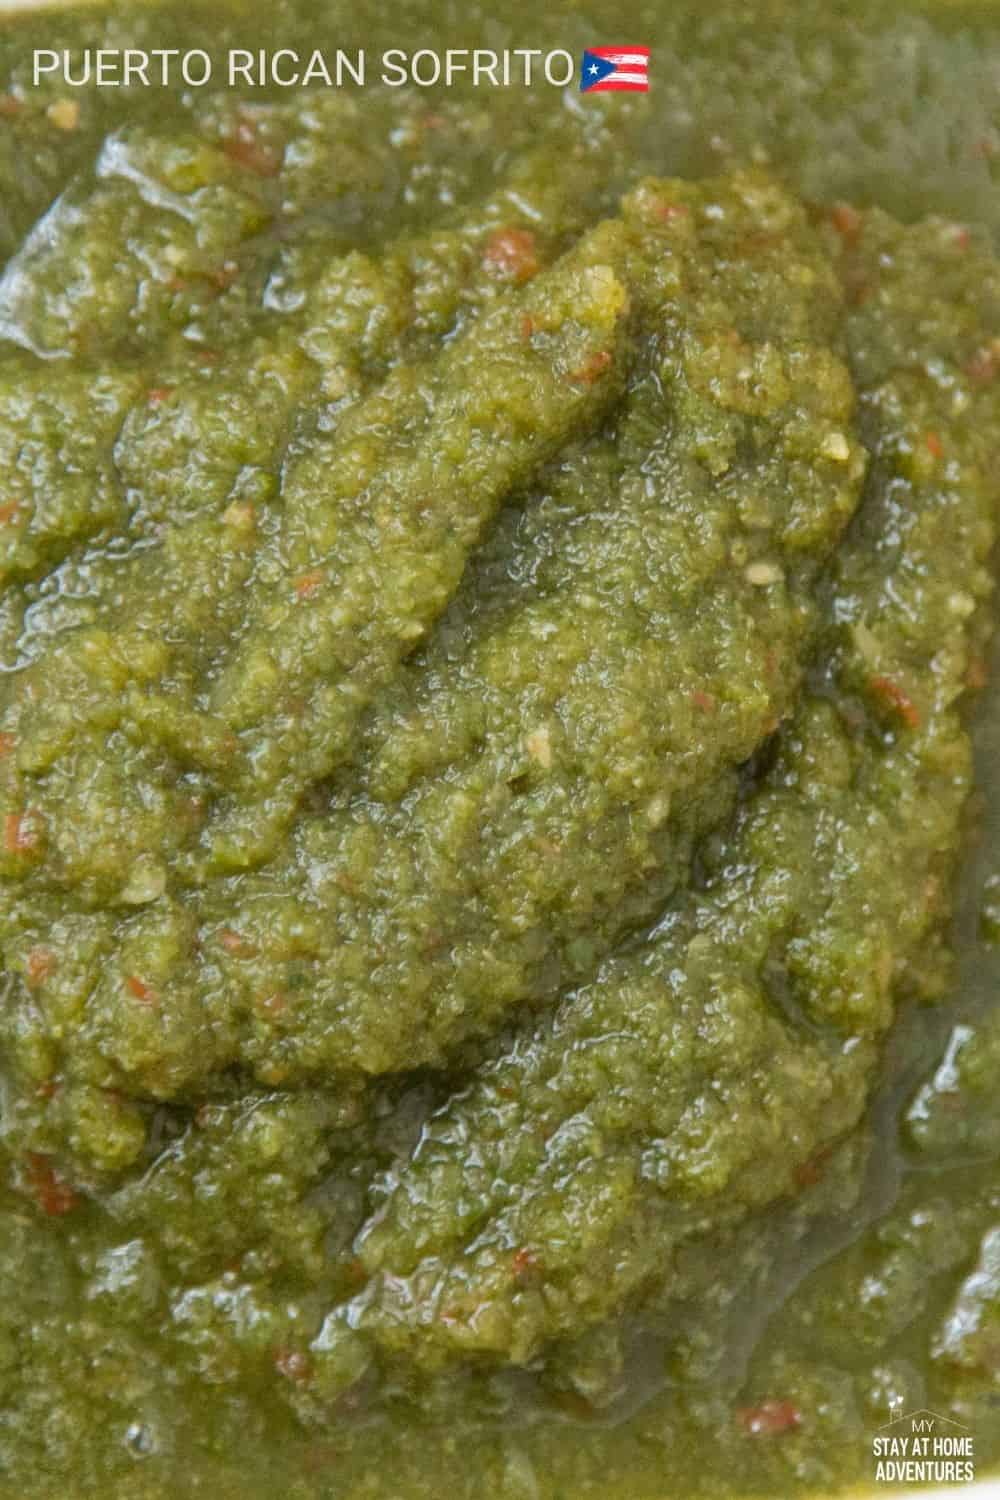 close up photo of sofrito to show texture